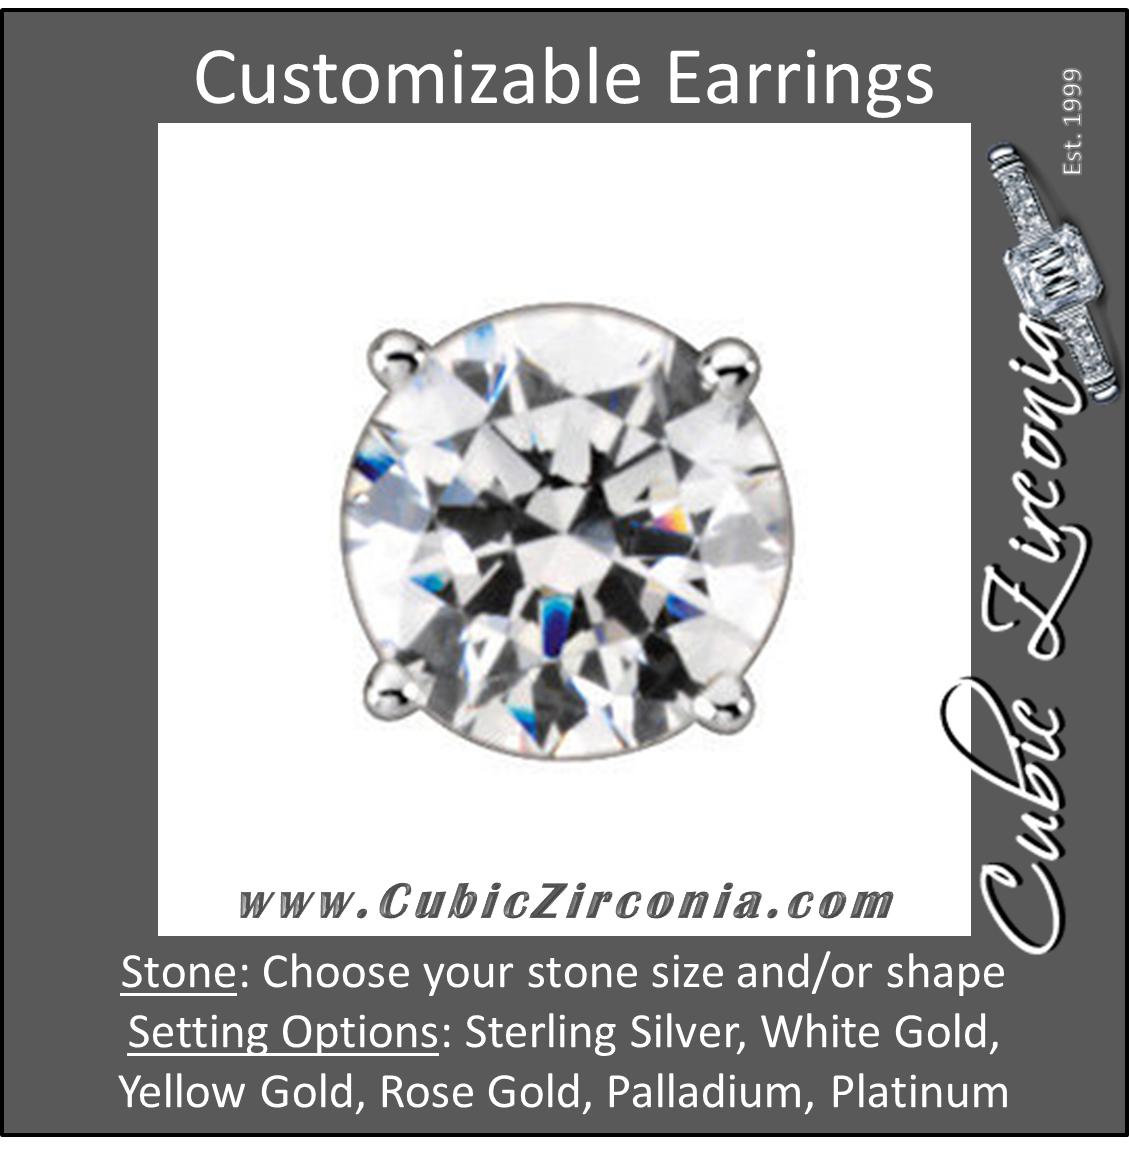 Cubic Zirconia Earrings- Customizable 4 Prong Pre-Notched Round Solitaire Stud Earring Set